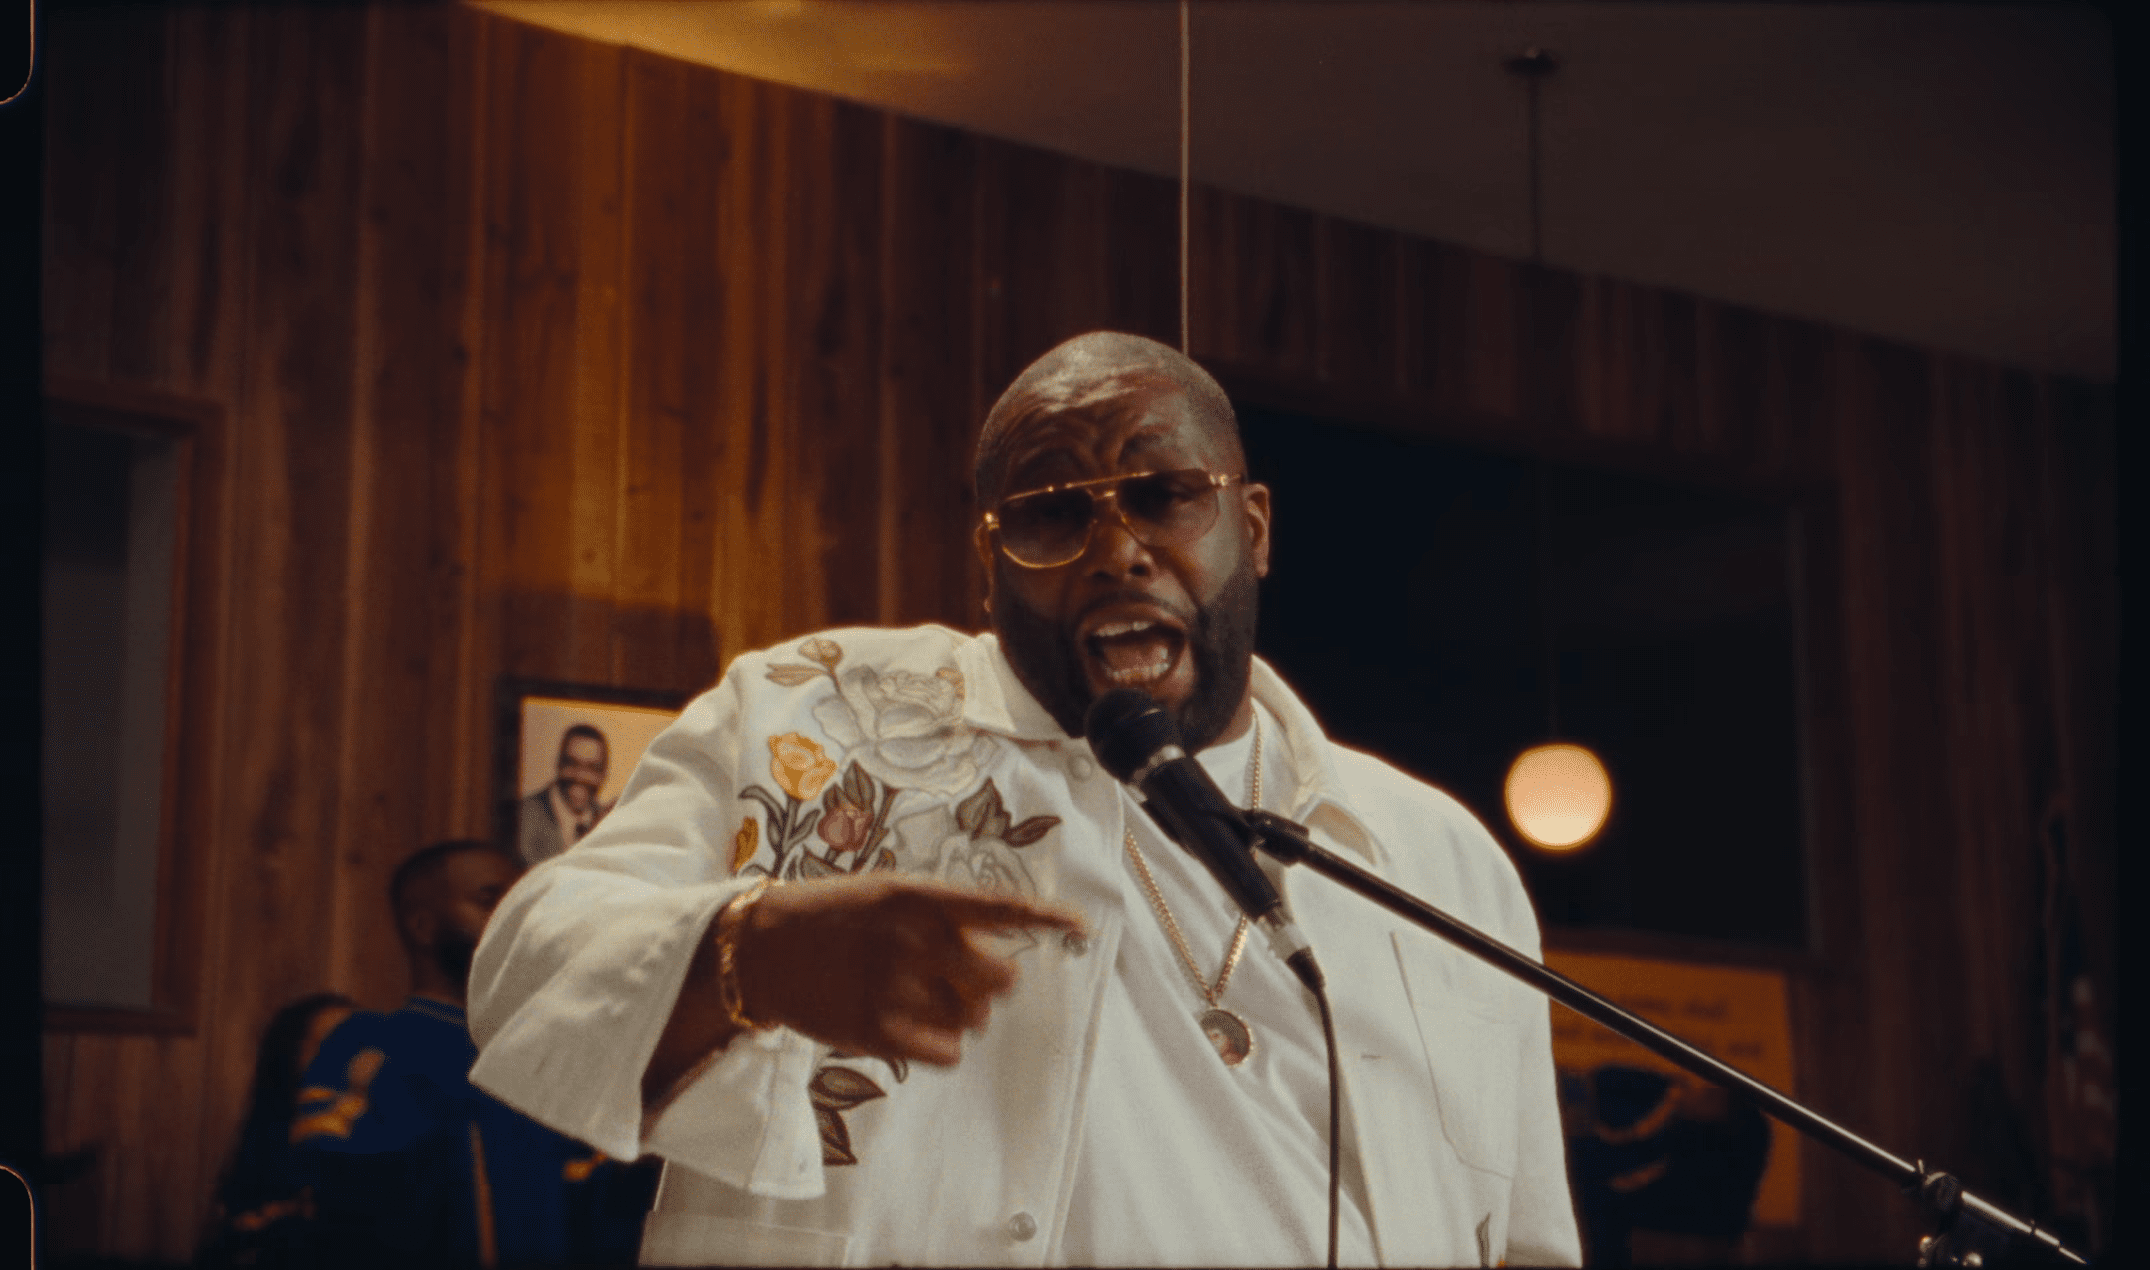 Killer Mike Drops Official Video For “Yes” From MICHAEL DELUXE